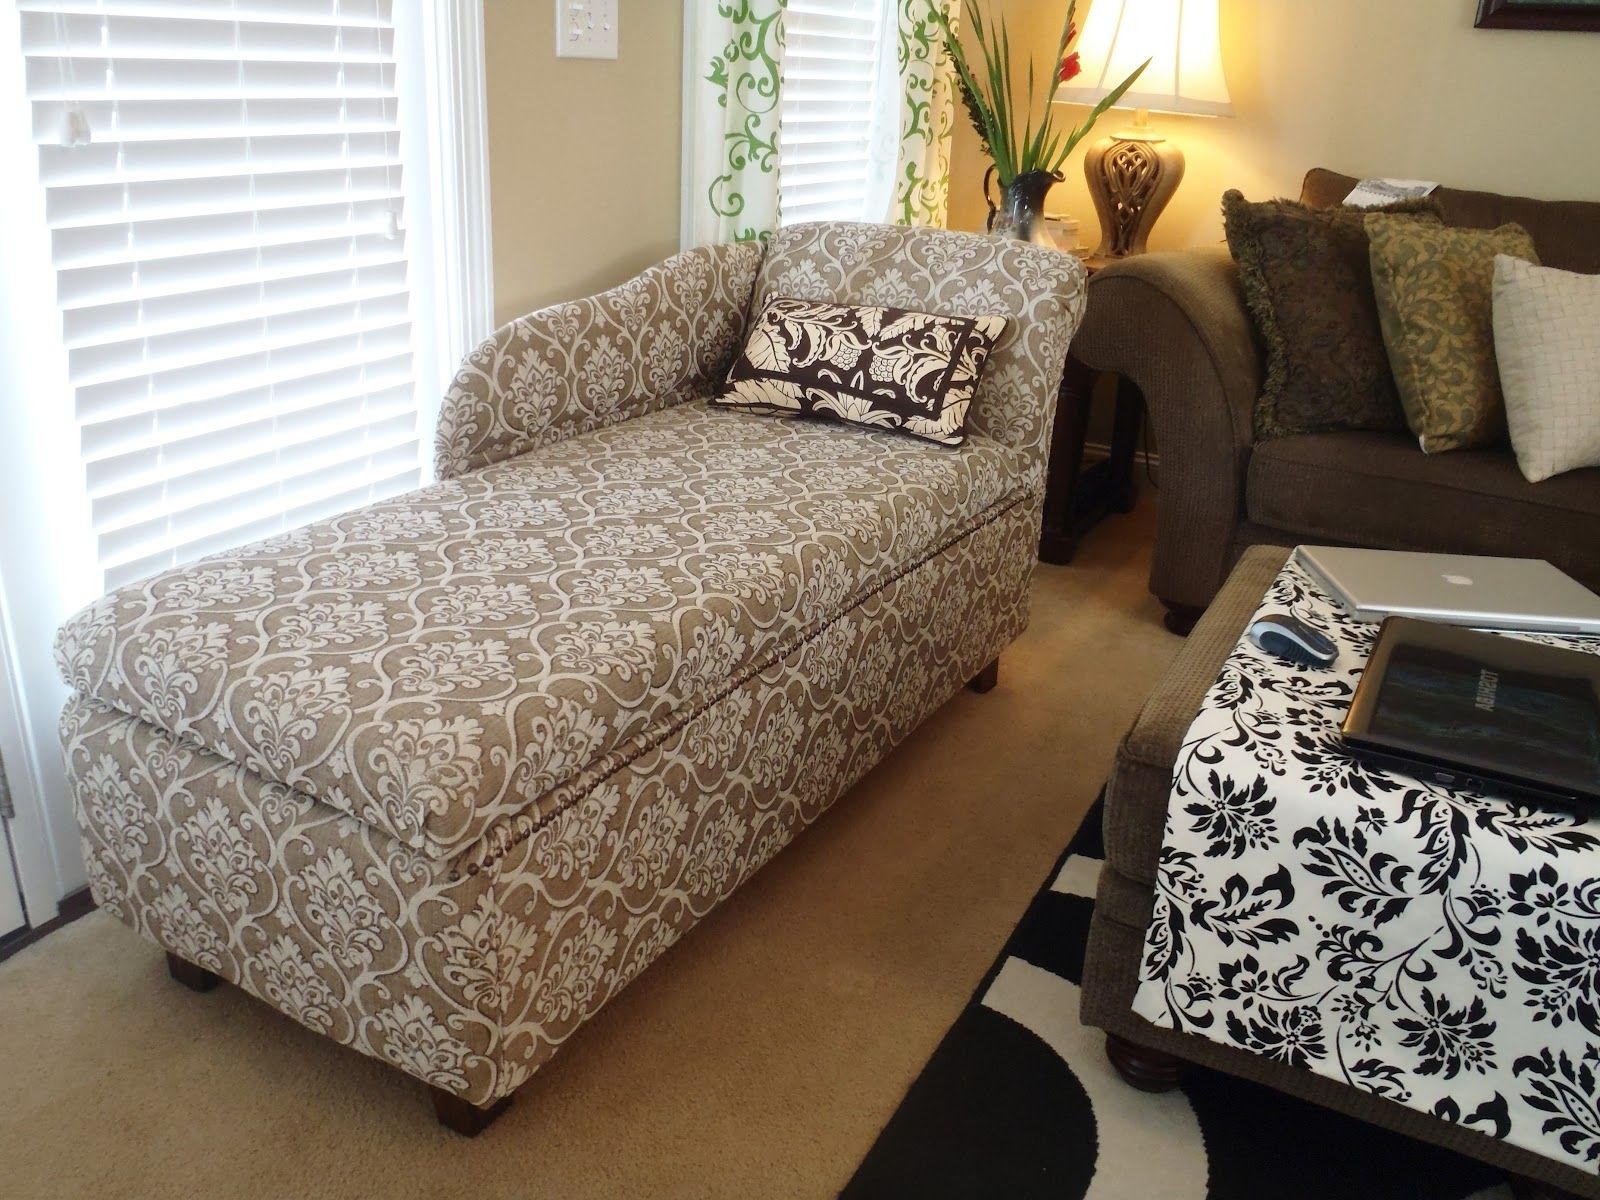 Recent Upholstered Chaise Lounges Intended For Lazy Liz On Less: Storage Chaise Lounge (View 11 of 15)